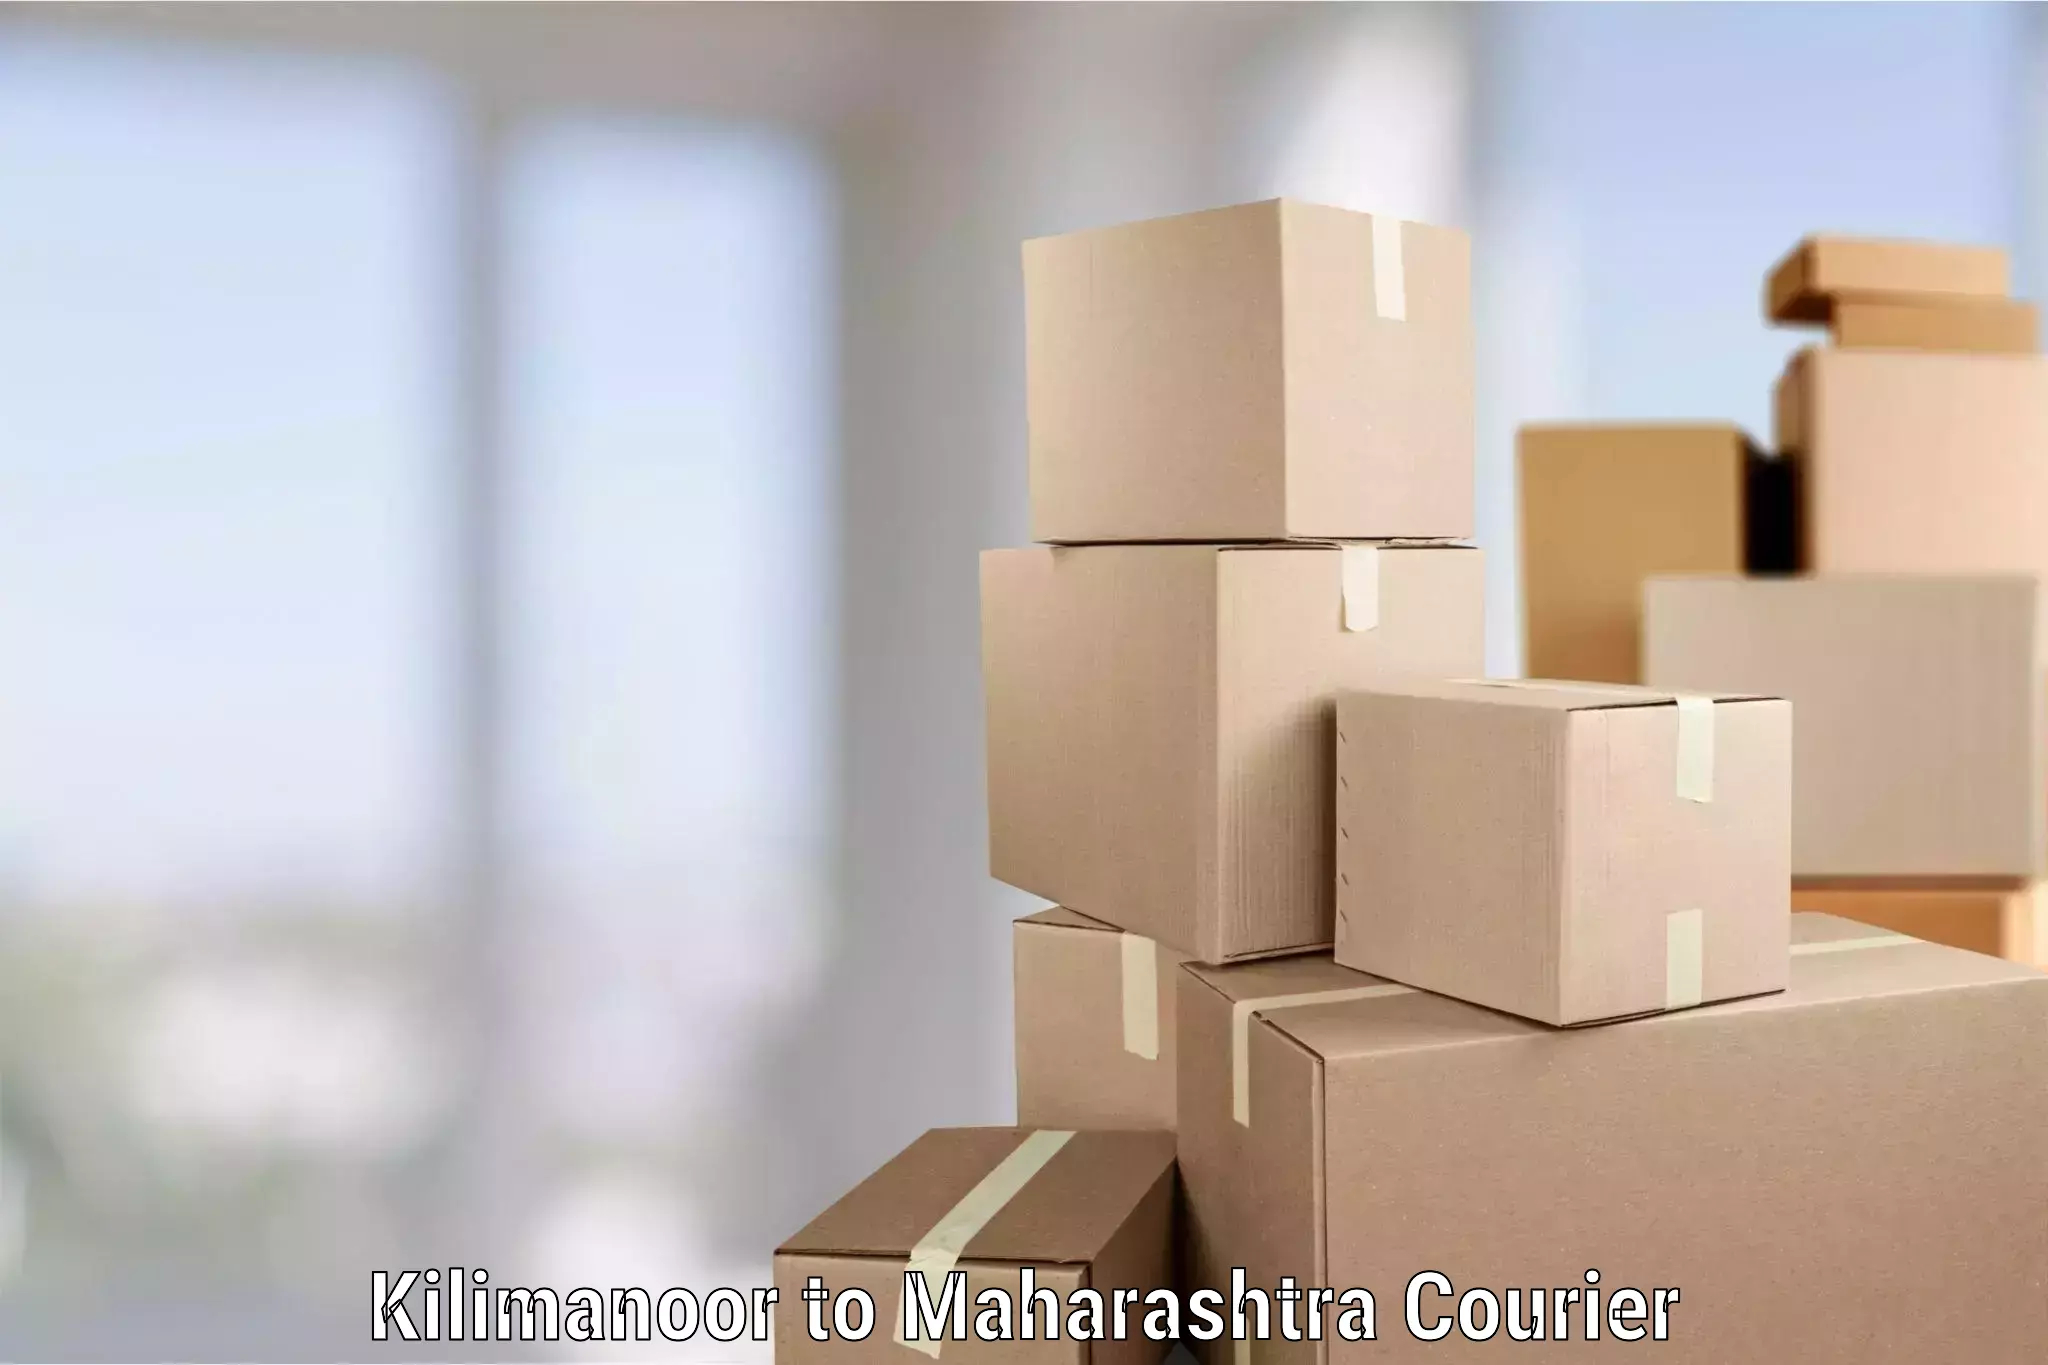 Residential relocation services in Kilimanoor to Chiplun